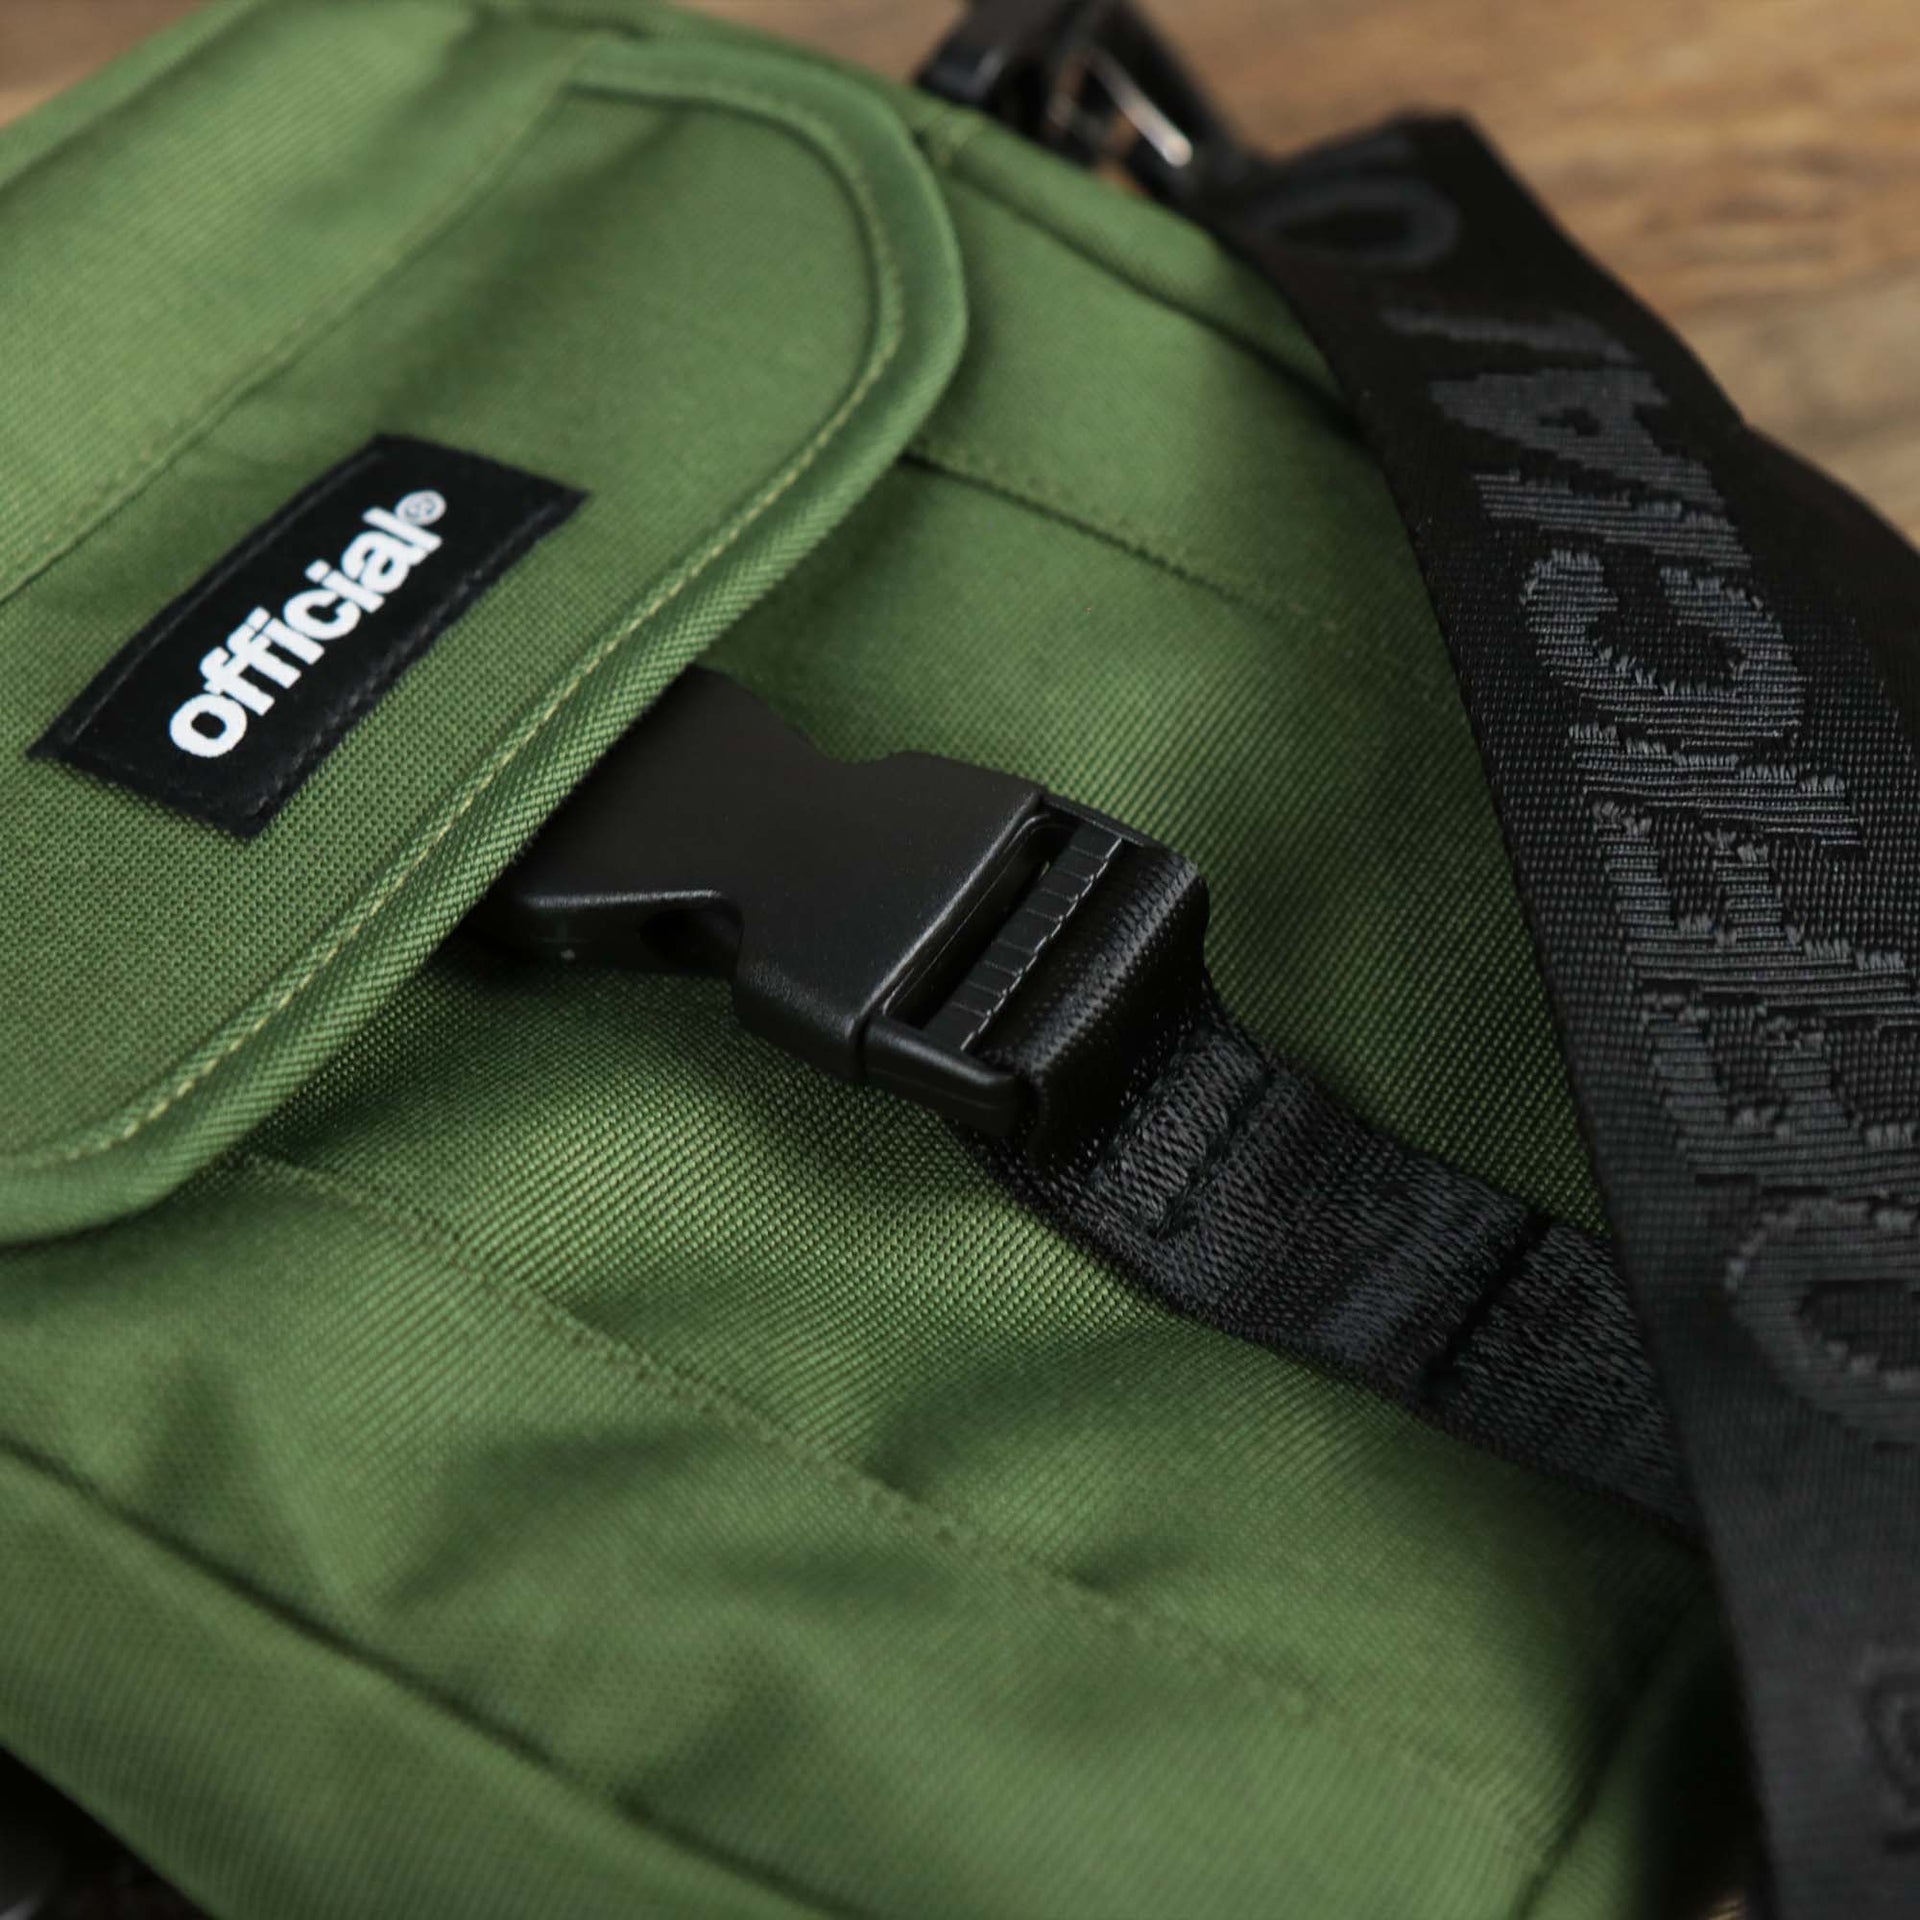 The clasp on the Essential Nylon Shoulder Bag Streetwear with Mesh Pocket | Official Olive